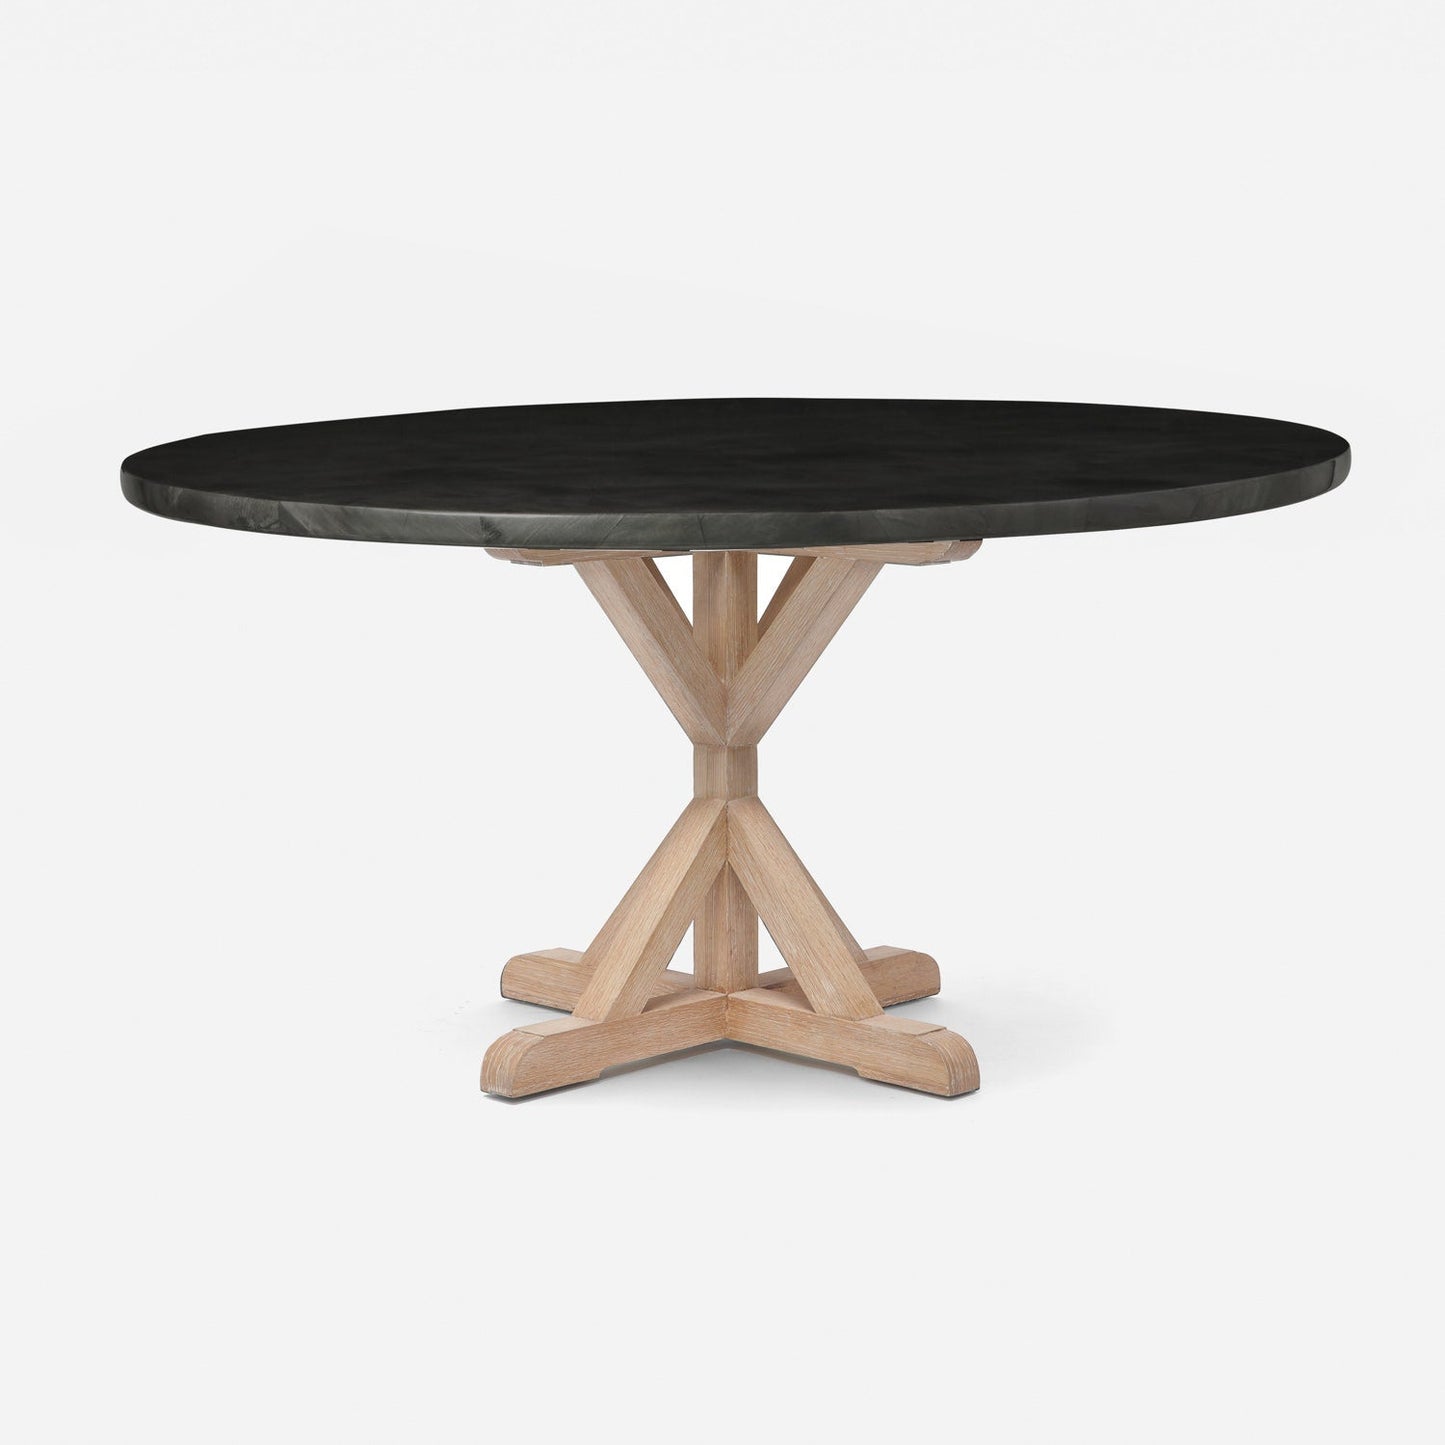 Made Goods Dane 48" x 30" White Cerused Oak Dinning Table With Round Dark Faux Horn Table Top